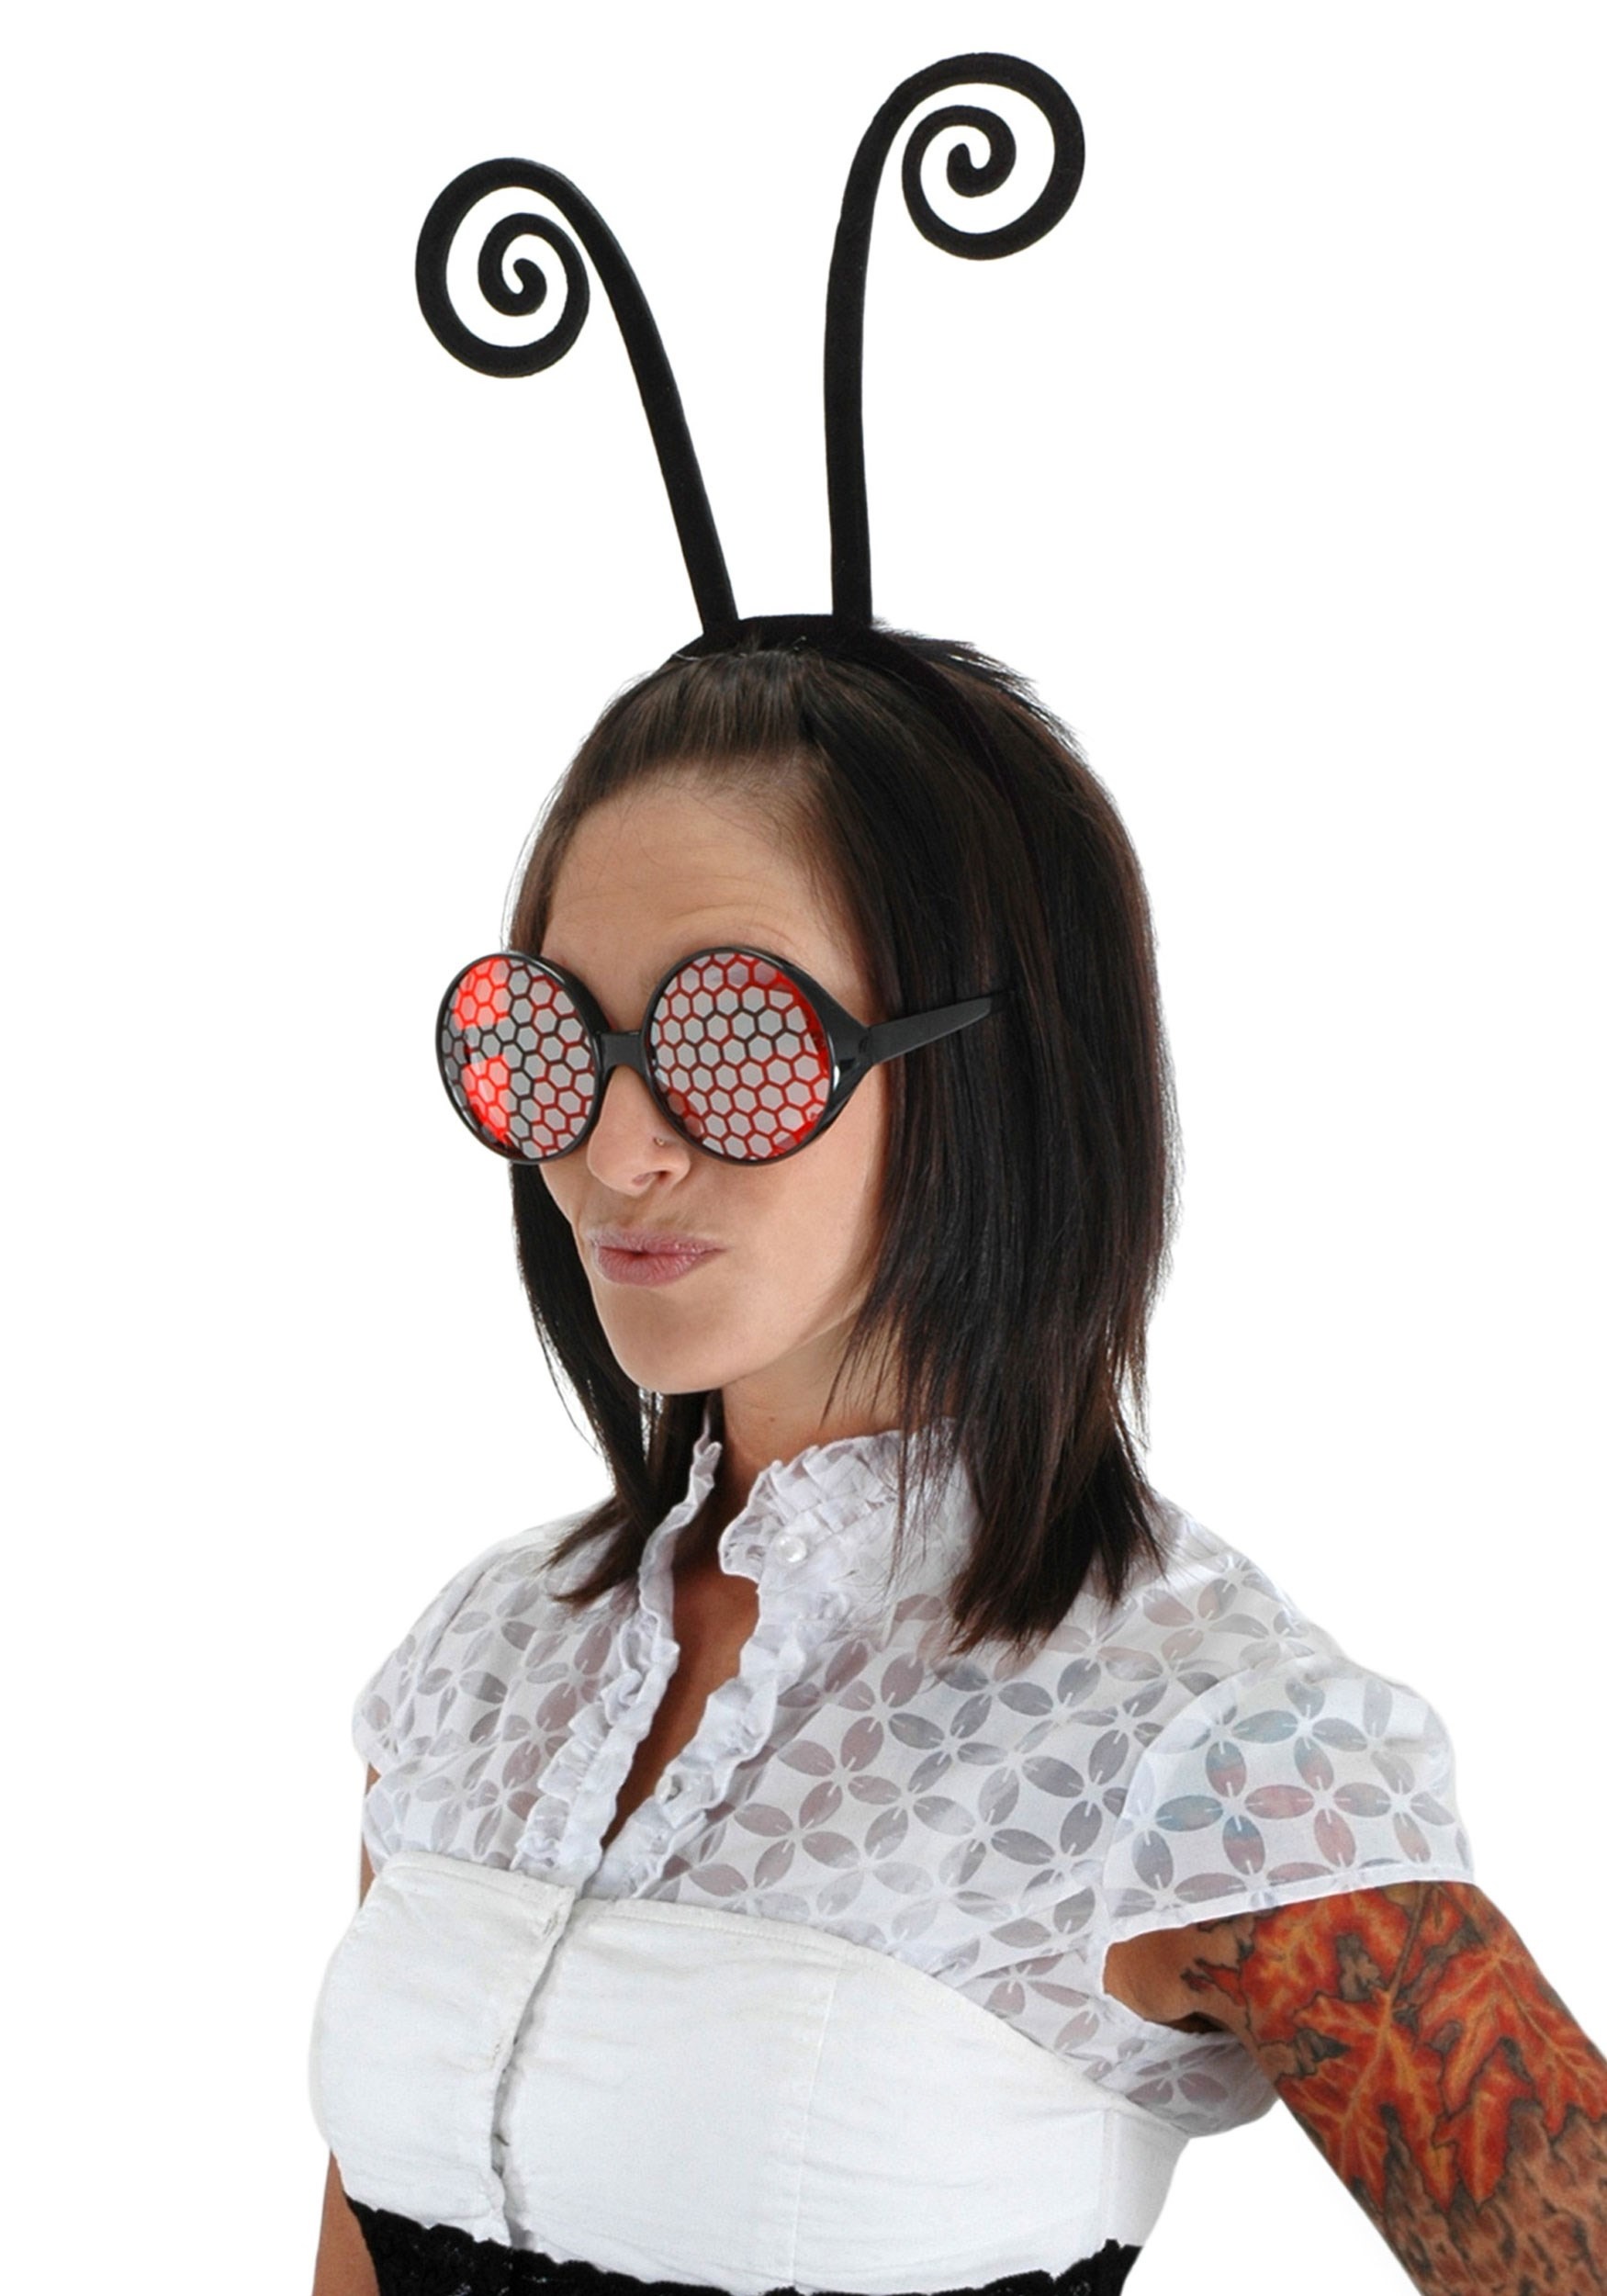 Antenna Headband Accessory | Insect Costume Accessories